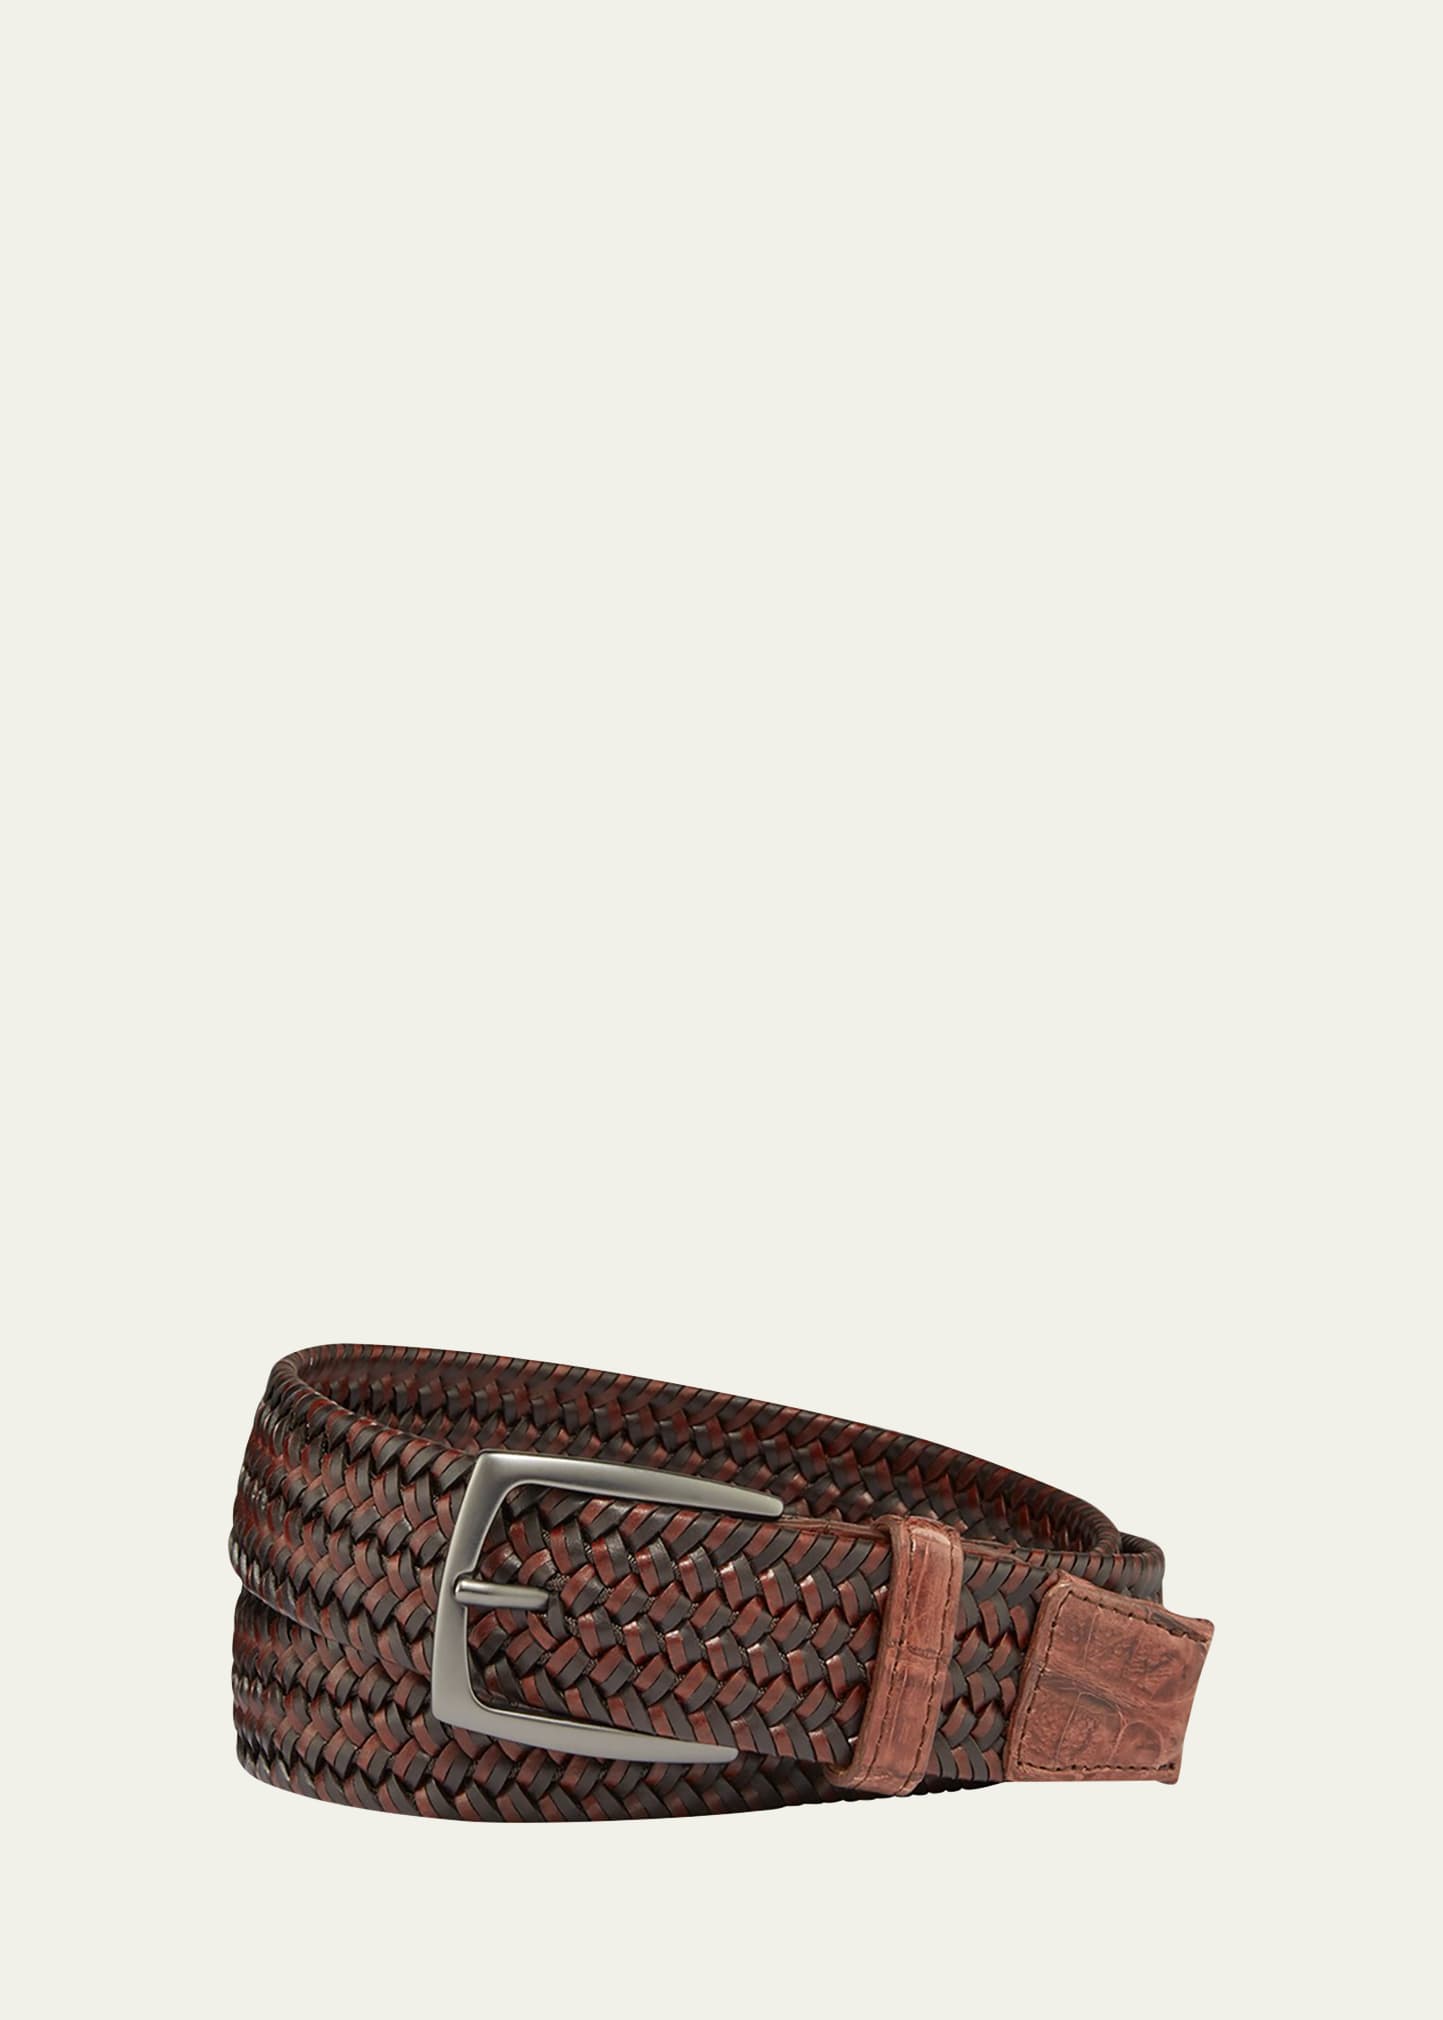 Men's Woven Leather Stretch Belt with Crocodile Trim